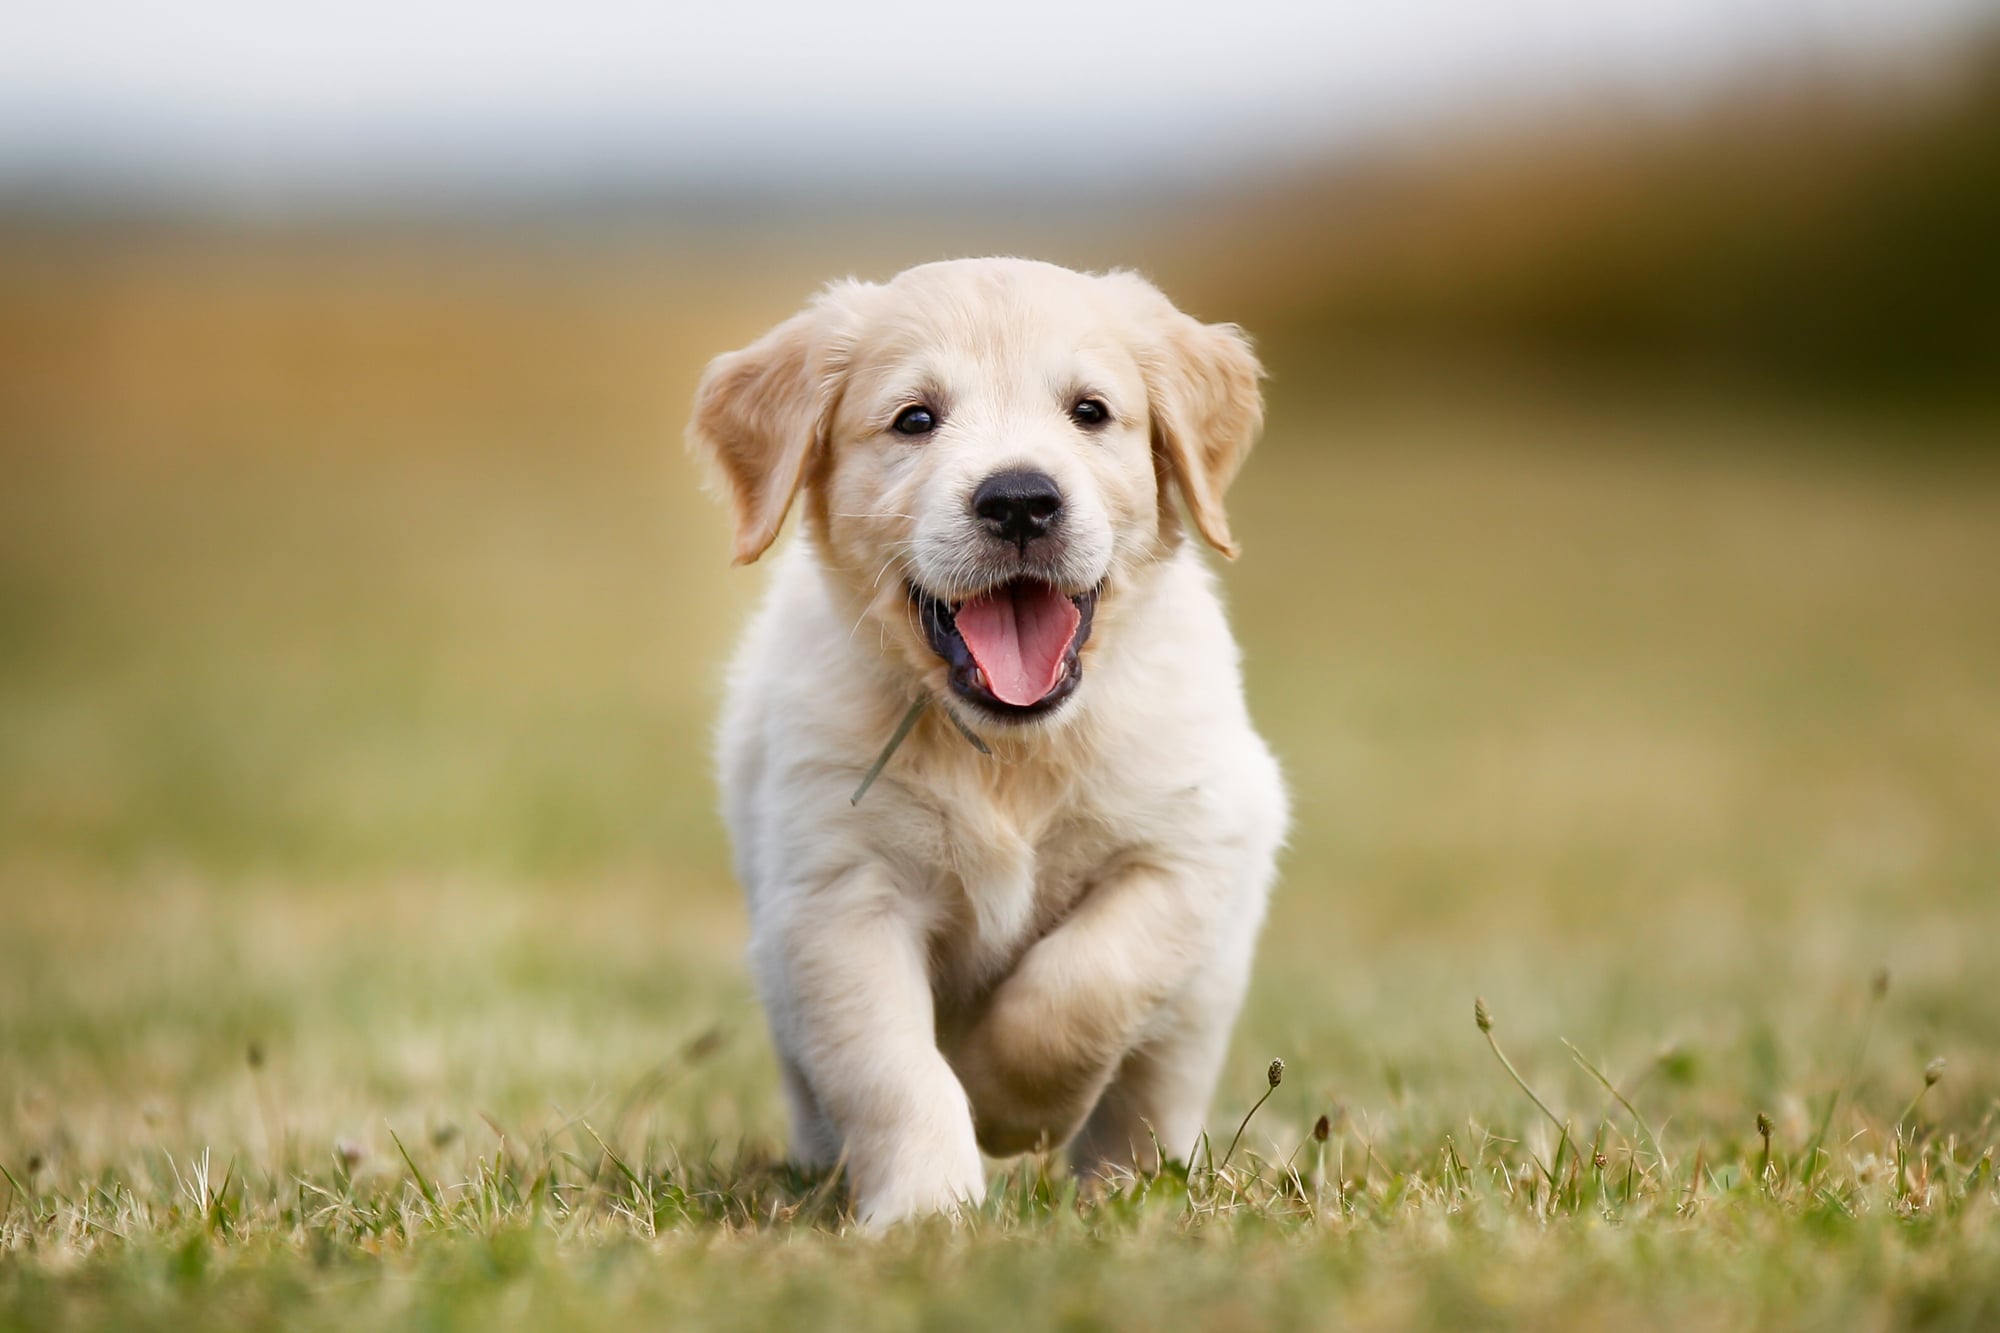 Seven week old golden retriever puppy outdoors on a sunny day.